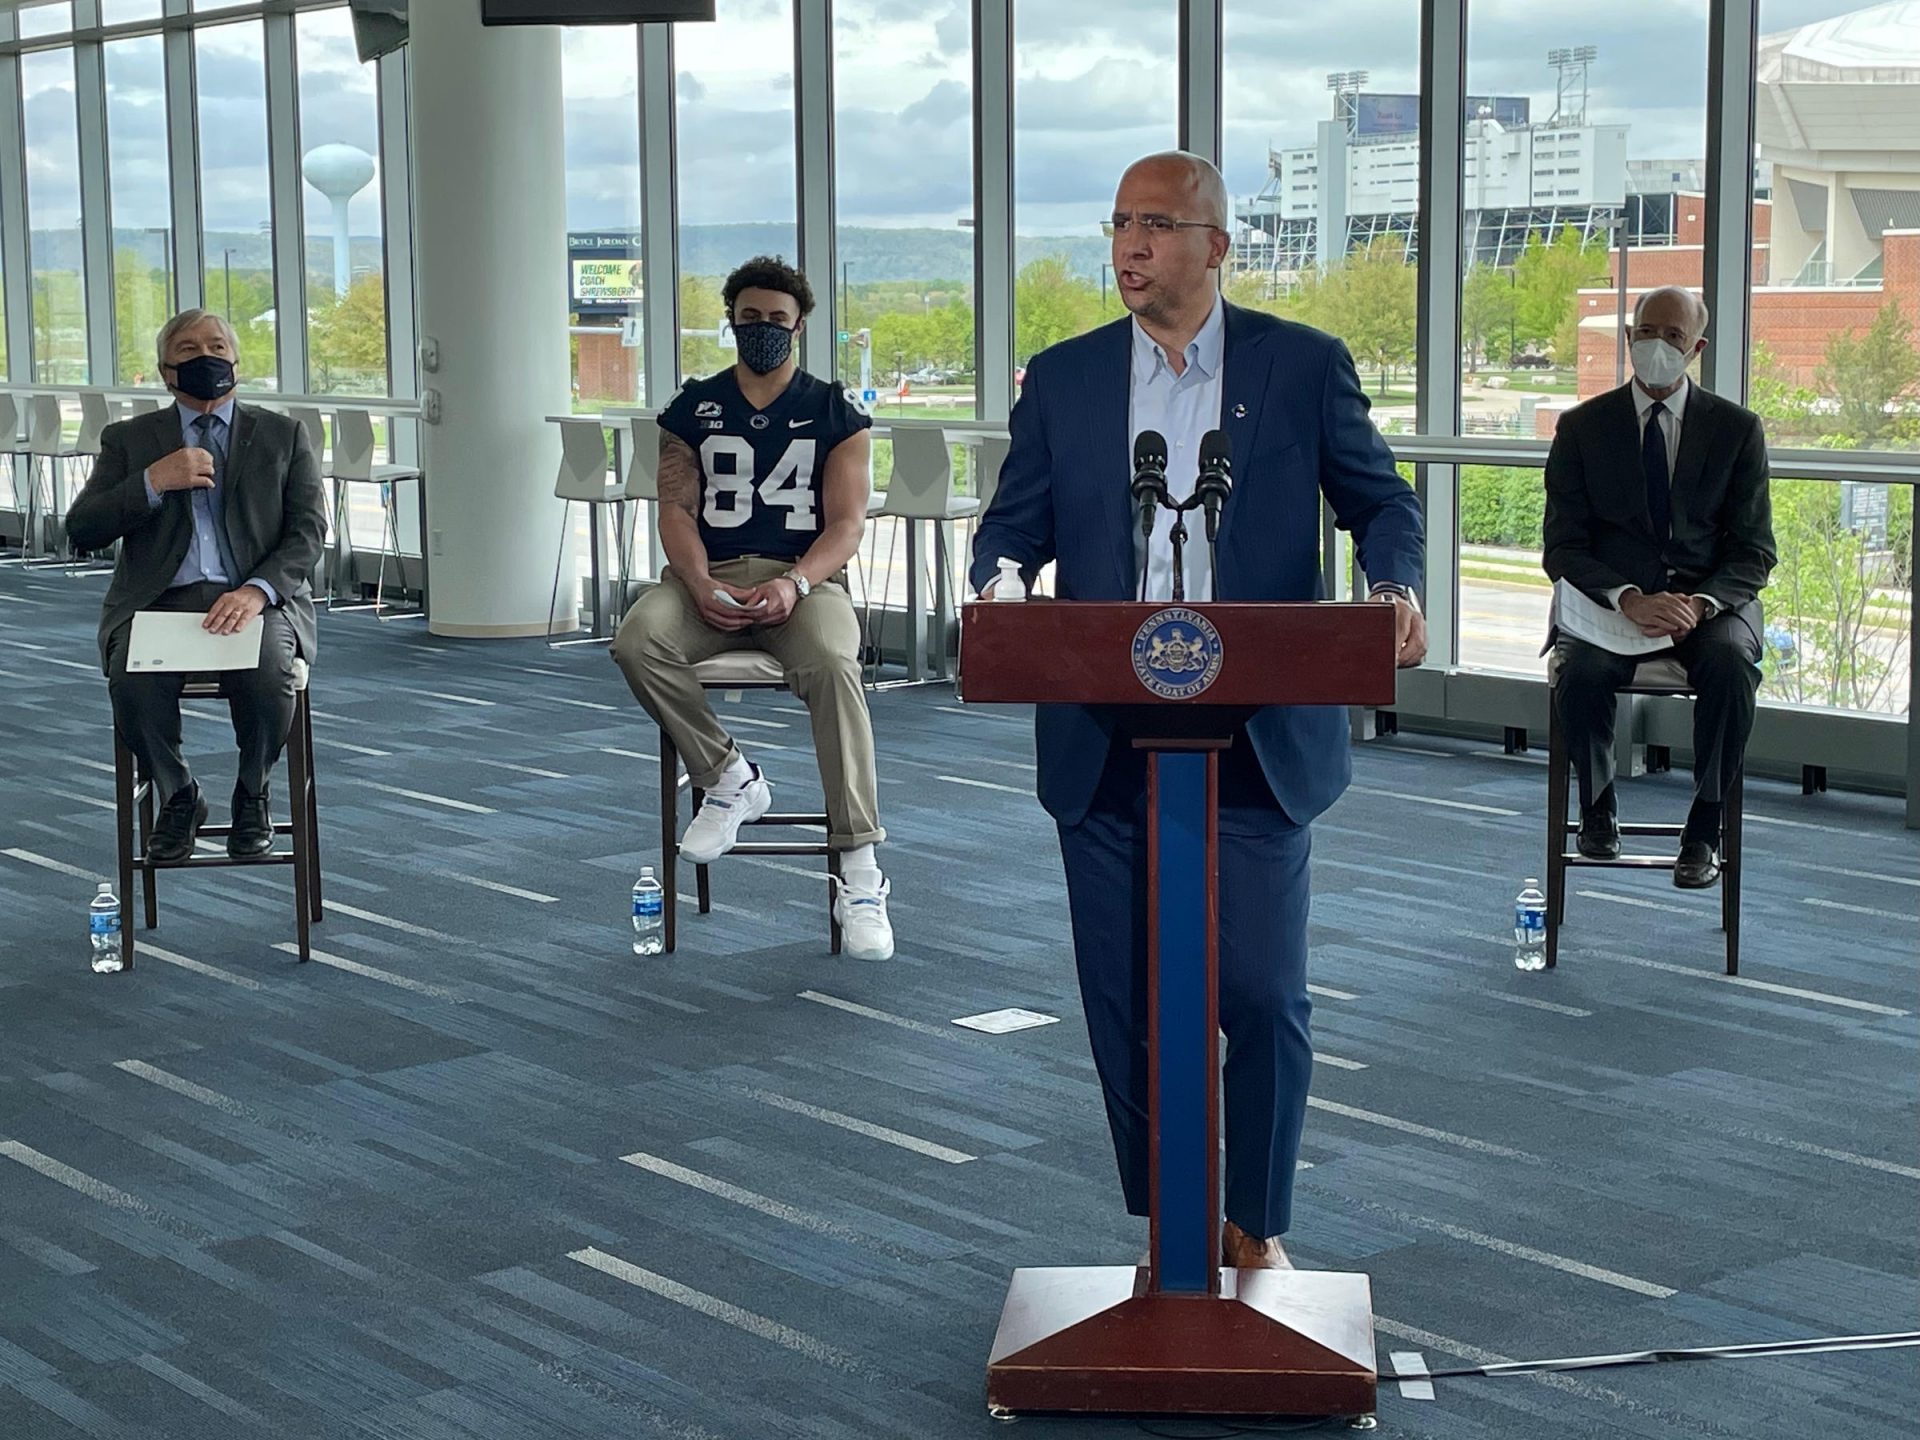 Penn State football coach James Franklin speaks to reporters about the importance of COVID-19 vaccines. Penn State president Eric Barron, freshman football player Theo Johnson and Governor Tom Wolf (seated, L to R) also spoke at the event.